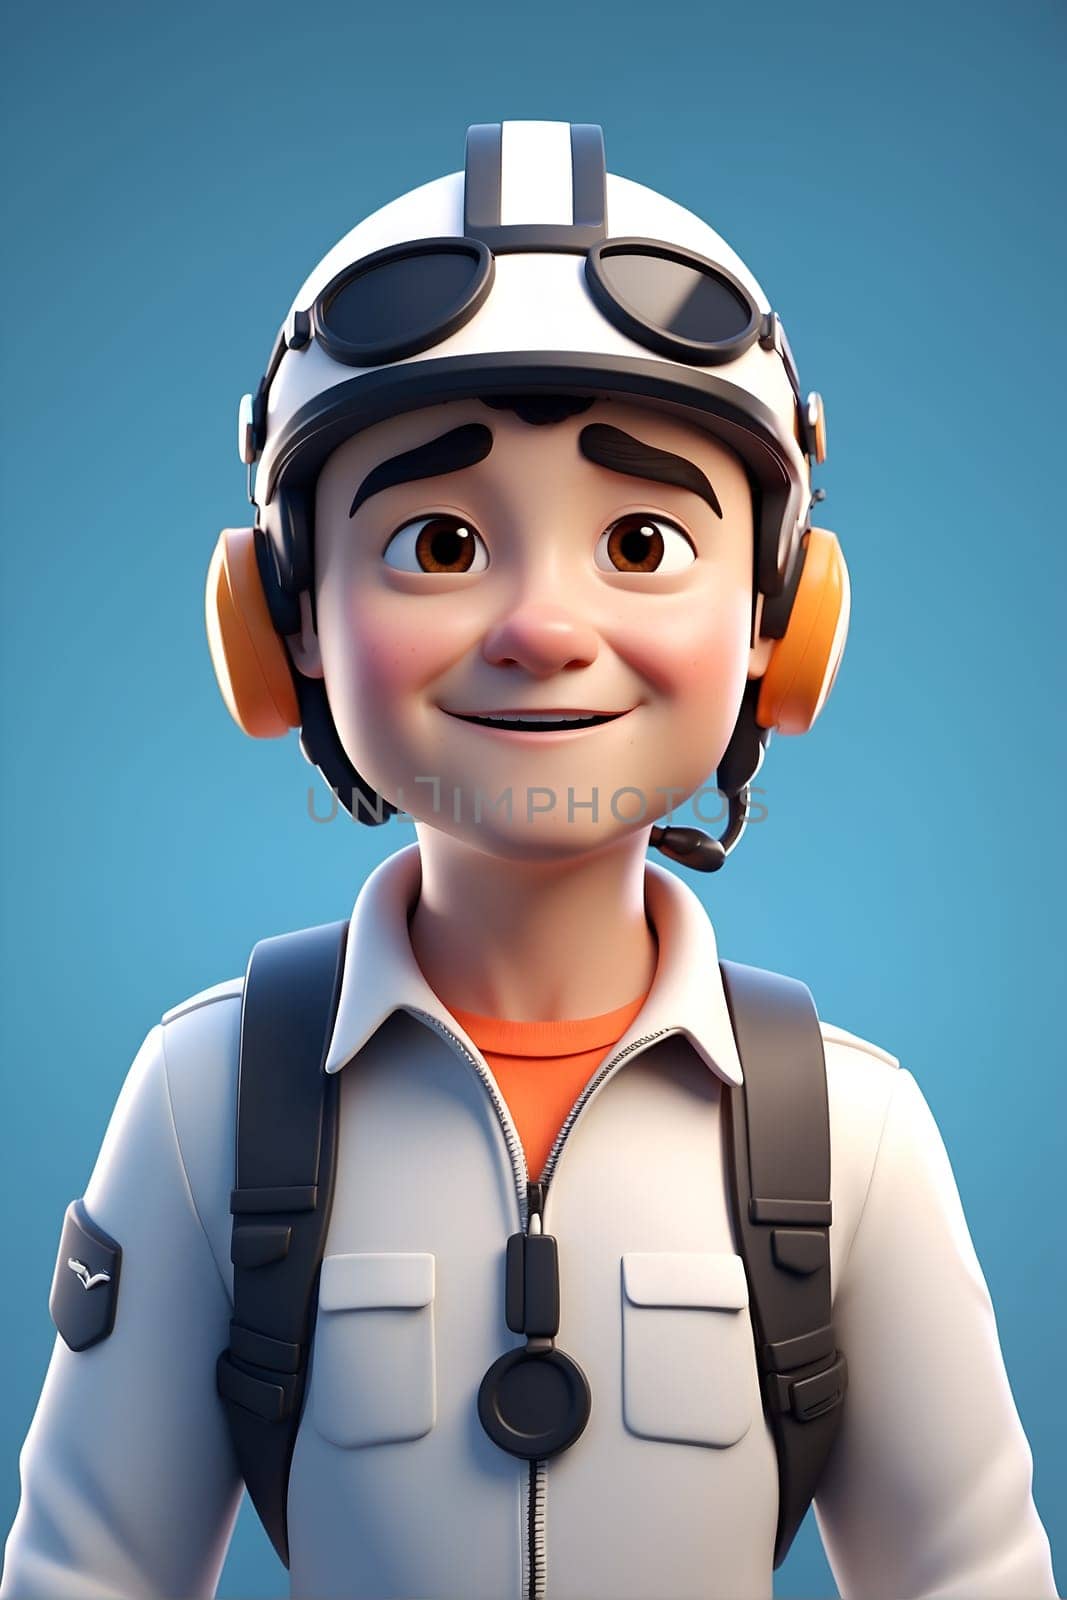 A cartoon character with a pilots helmet and goggles.